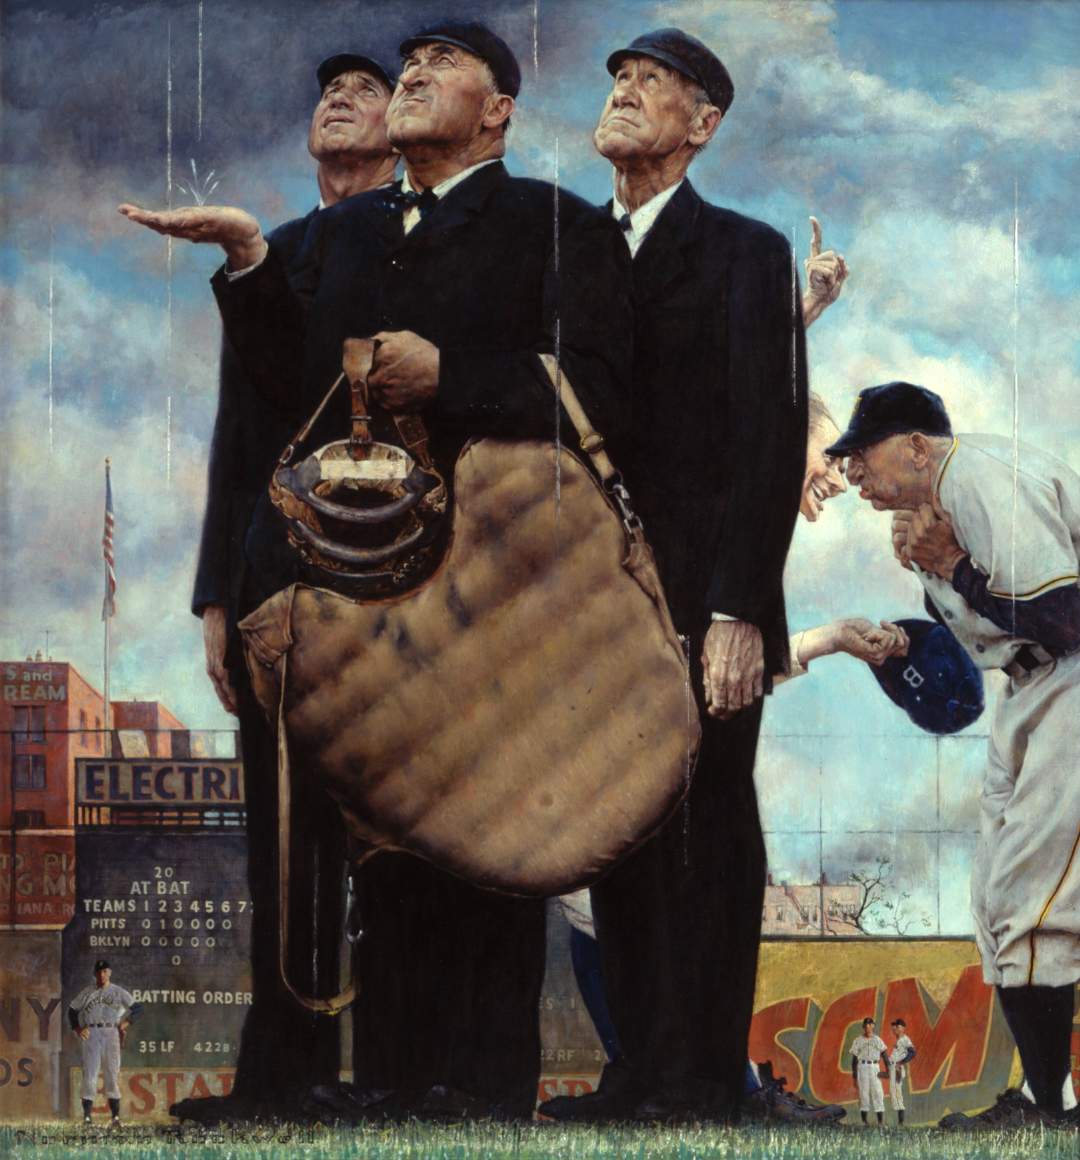 #OTD in 1941 Umpire Jocko Conlan ejects #Pirates manager Frankie Frisch from the 2nd game of a doubleheader when he appears with an umbrella to protest playing conditions at Ebbets Field. The argument is later portrayed in a famous oil painting by artist Norman Rockwell.#baseball